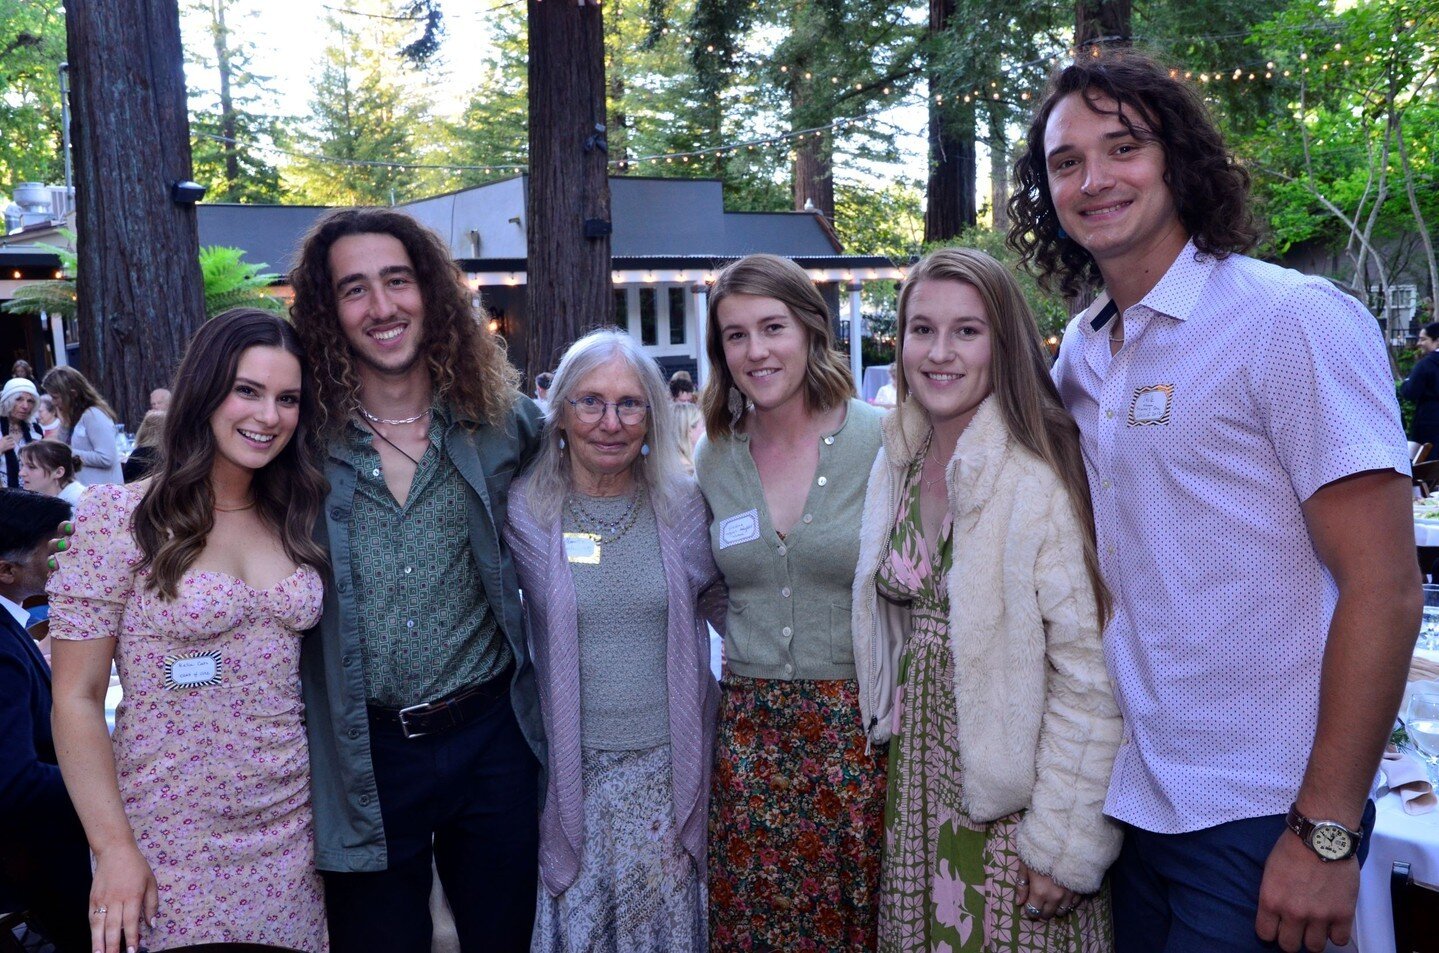 Beloved teacher Manette Teitelbaum is pictured here (center) with Class of 2012 alumni Bella, Will, Fielding, Lily, and Jack at our school's 50th Anniversary Gala. Manette has touched the lives of thousands of students during her 40-year career at Ma